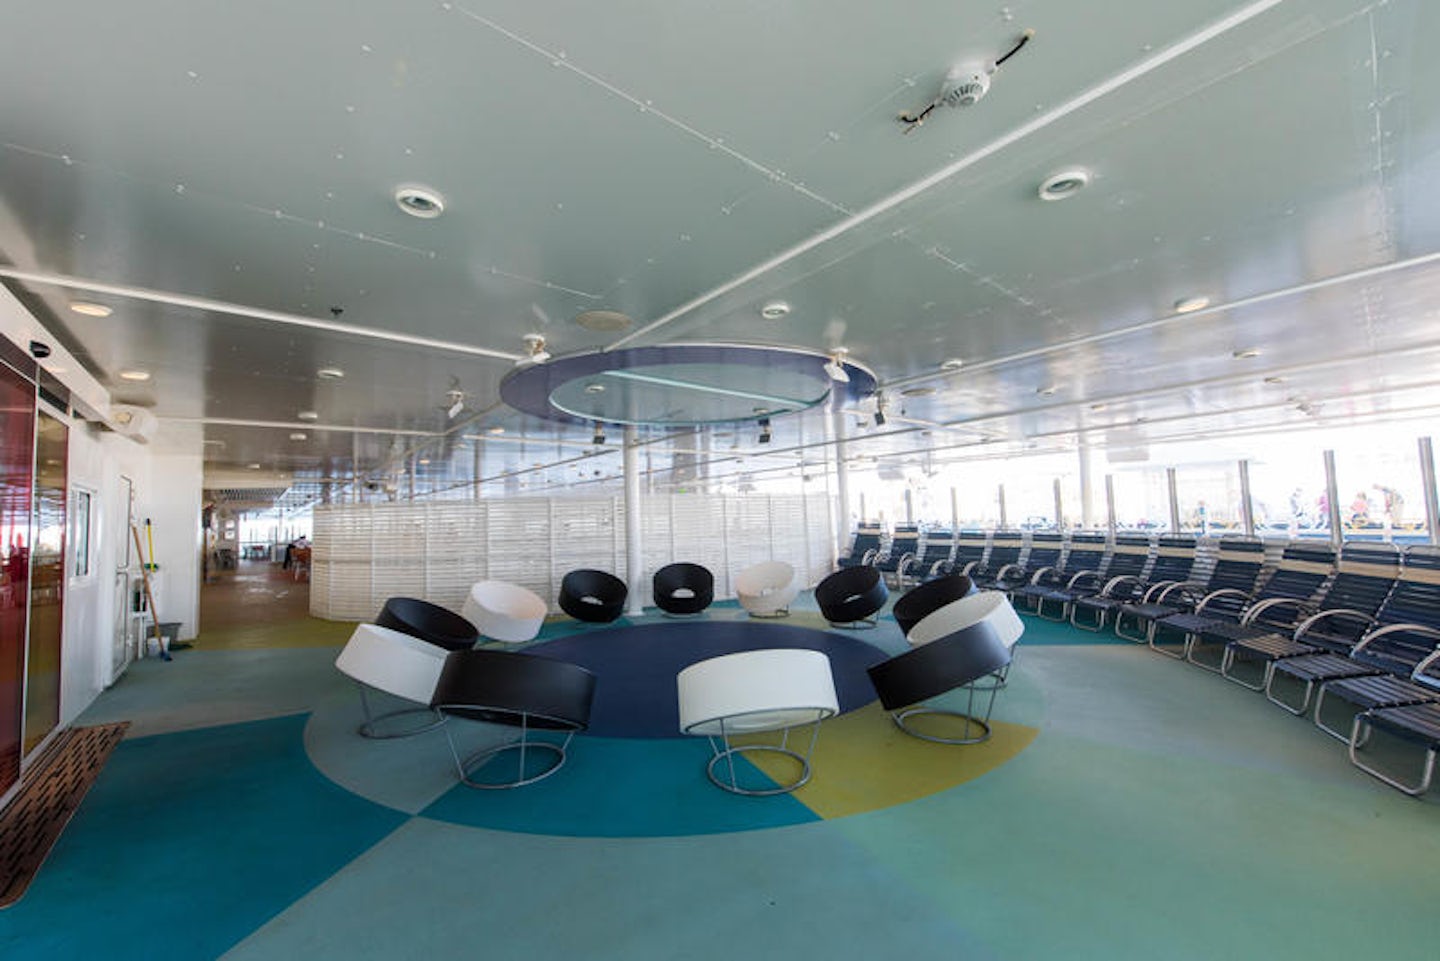 The Living Room on Oasis of the Seas